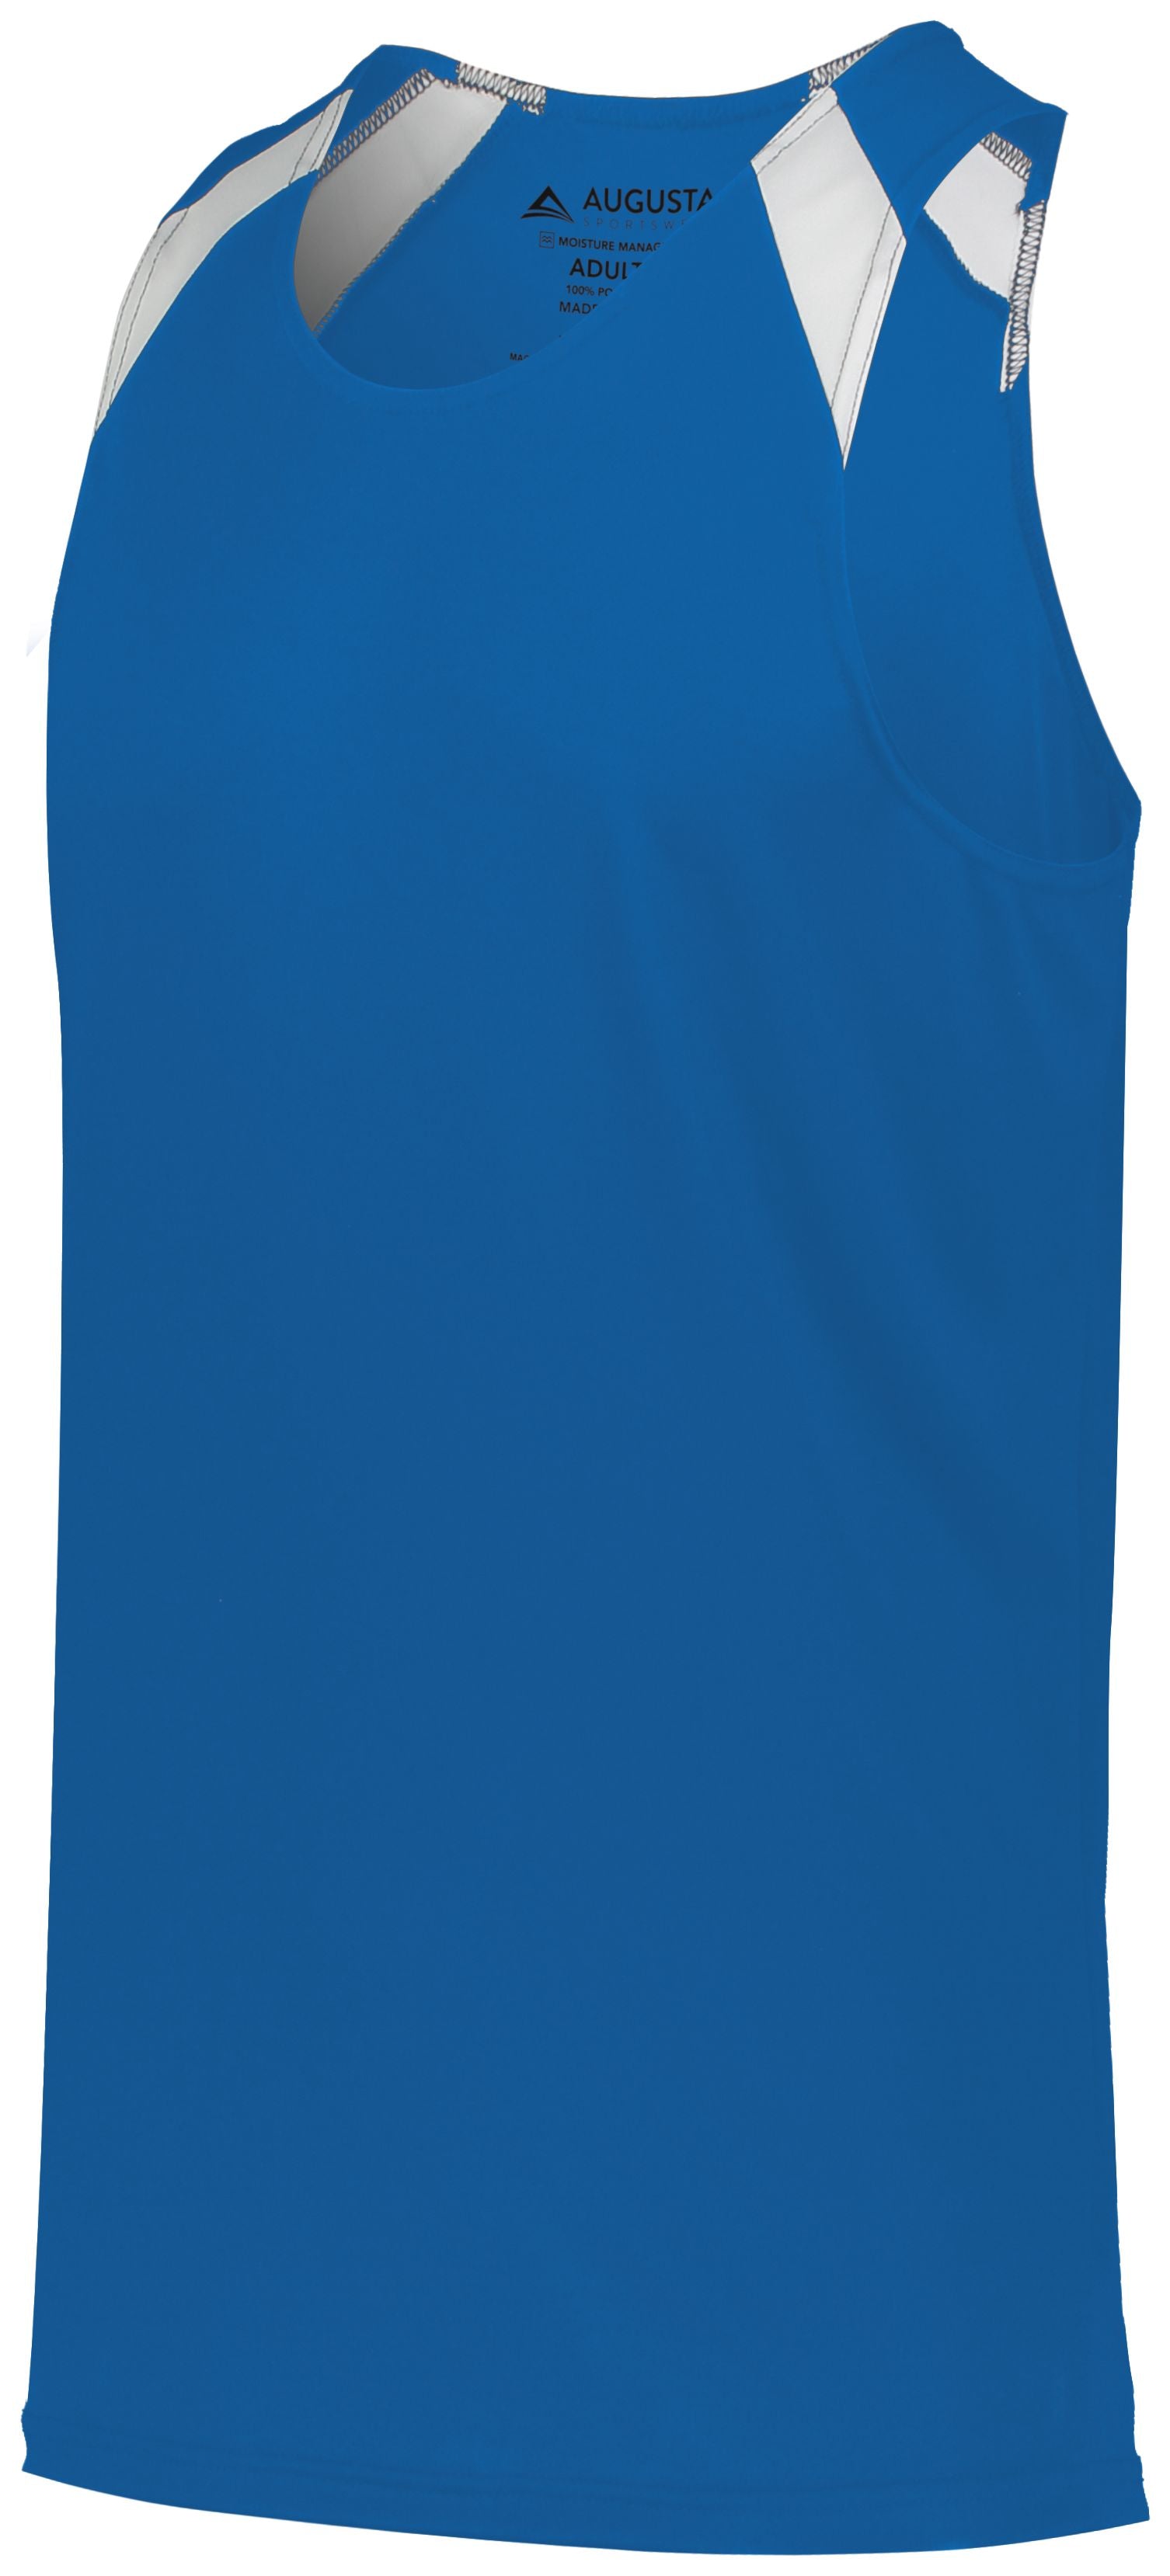 Augusta Sportswear Overspeed Track Jersey in Royal/White  -Part of the Adult, Adult-Jersey, Augusta-Products, Track-Field, Shirts product lines at KanaleyCreations.com